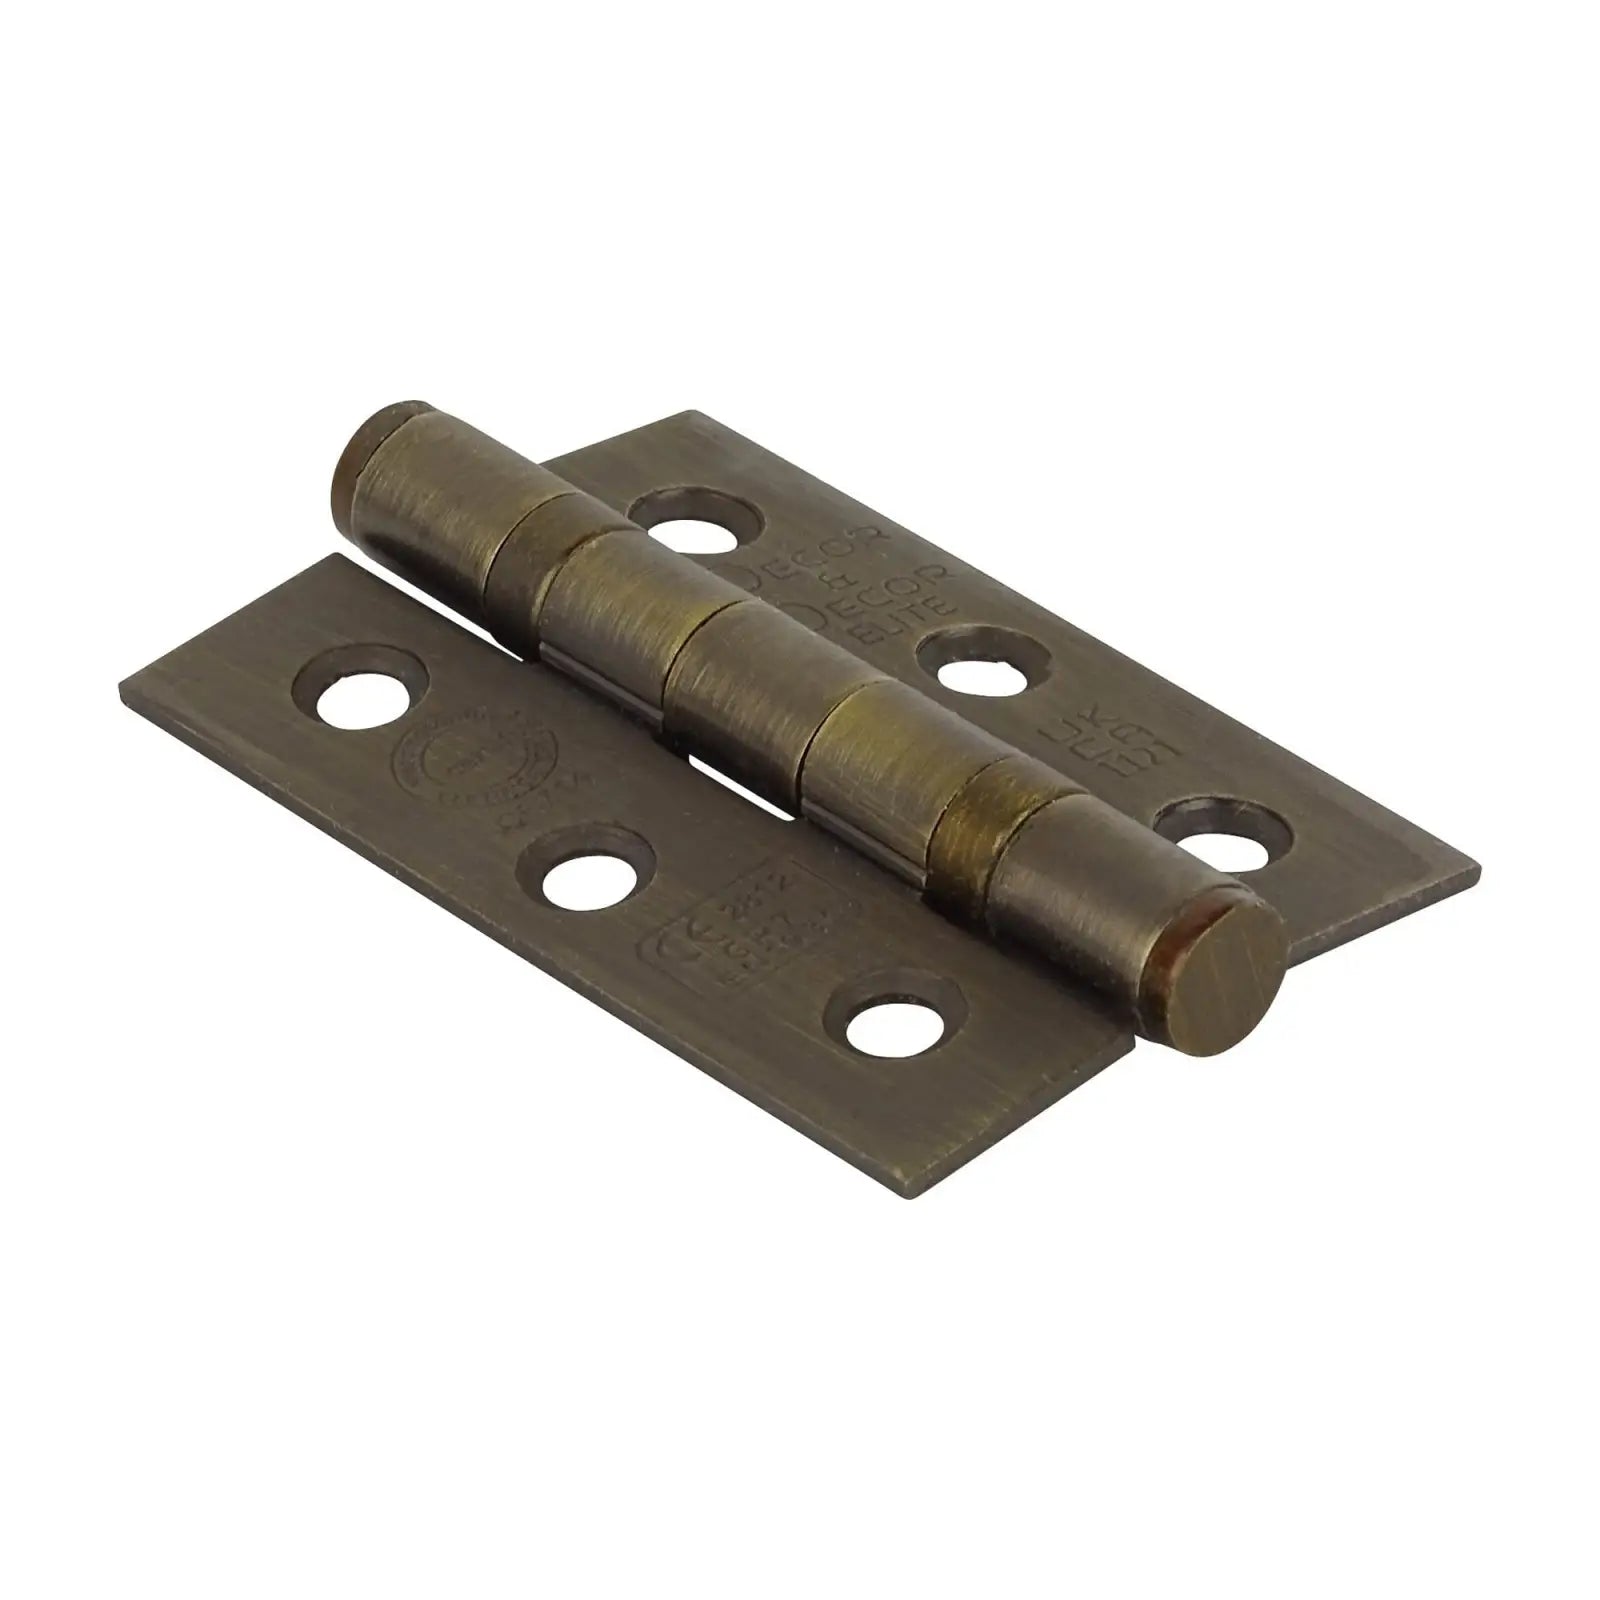 Ball Bearing Fire Rated Door Hinges - 76mm - Pair - Antique Brass